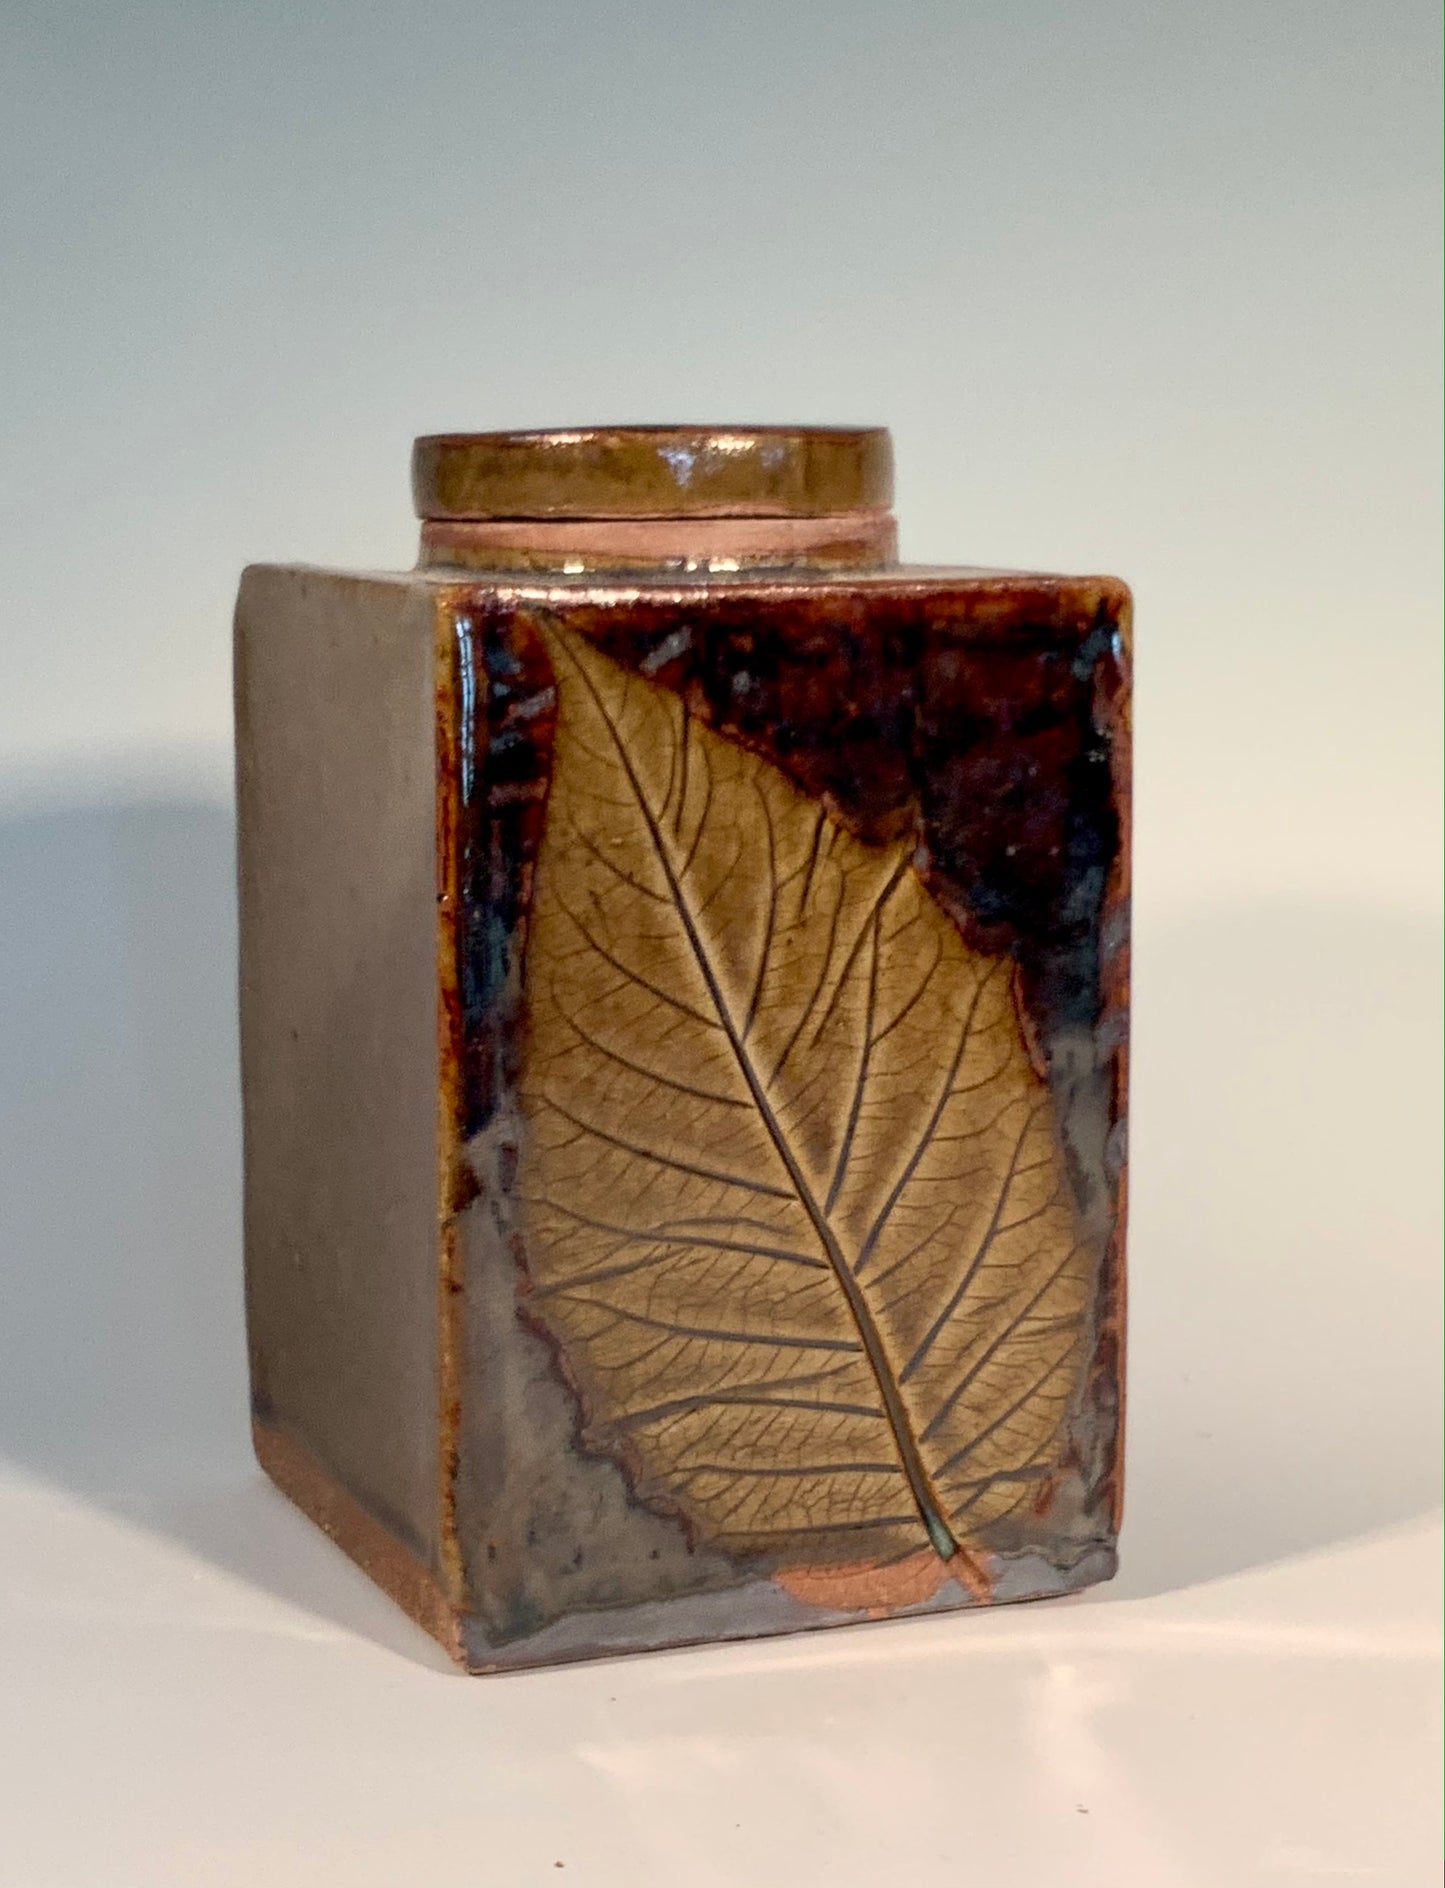 Rectangle Stoneware Jar / Leaf Imprint Muffy Moore: Ceramic Potter Stoneware jar with green / brown glaze  Leaf imprint on two sides with round stoneware lid     3 1/2" Long x 3 1/2" Wide x 6" Tall  Beautiful hand thrown stoneware jar with lid   Dishwasher, oven and food safe  Great for storing loose leaf teas or coffee